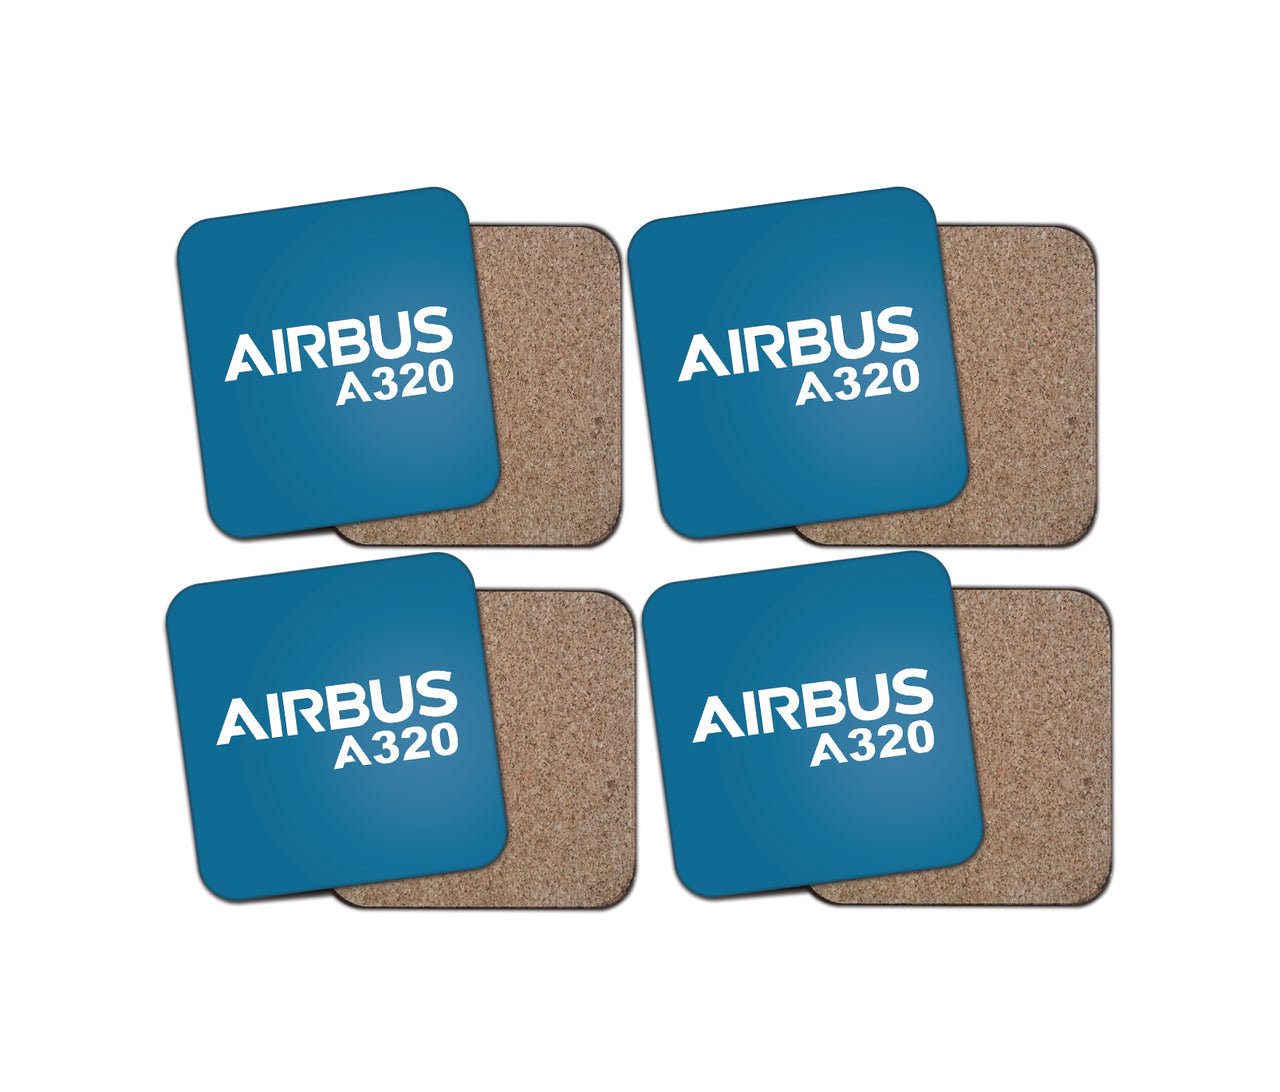 Airbus A320 & Text Designed Coasters